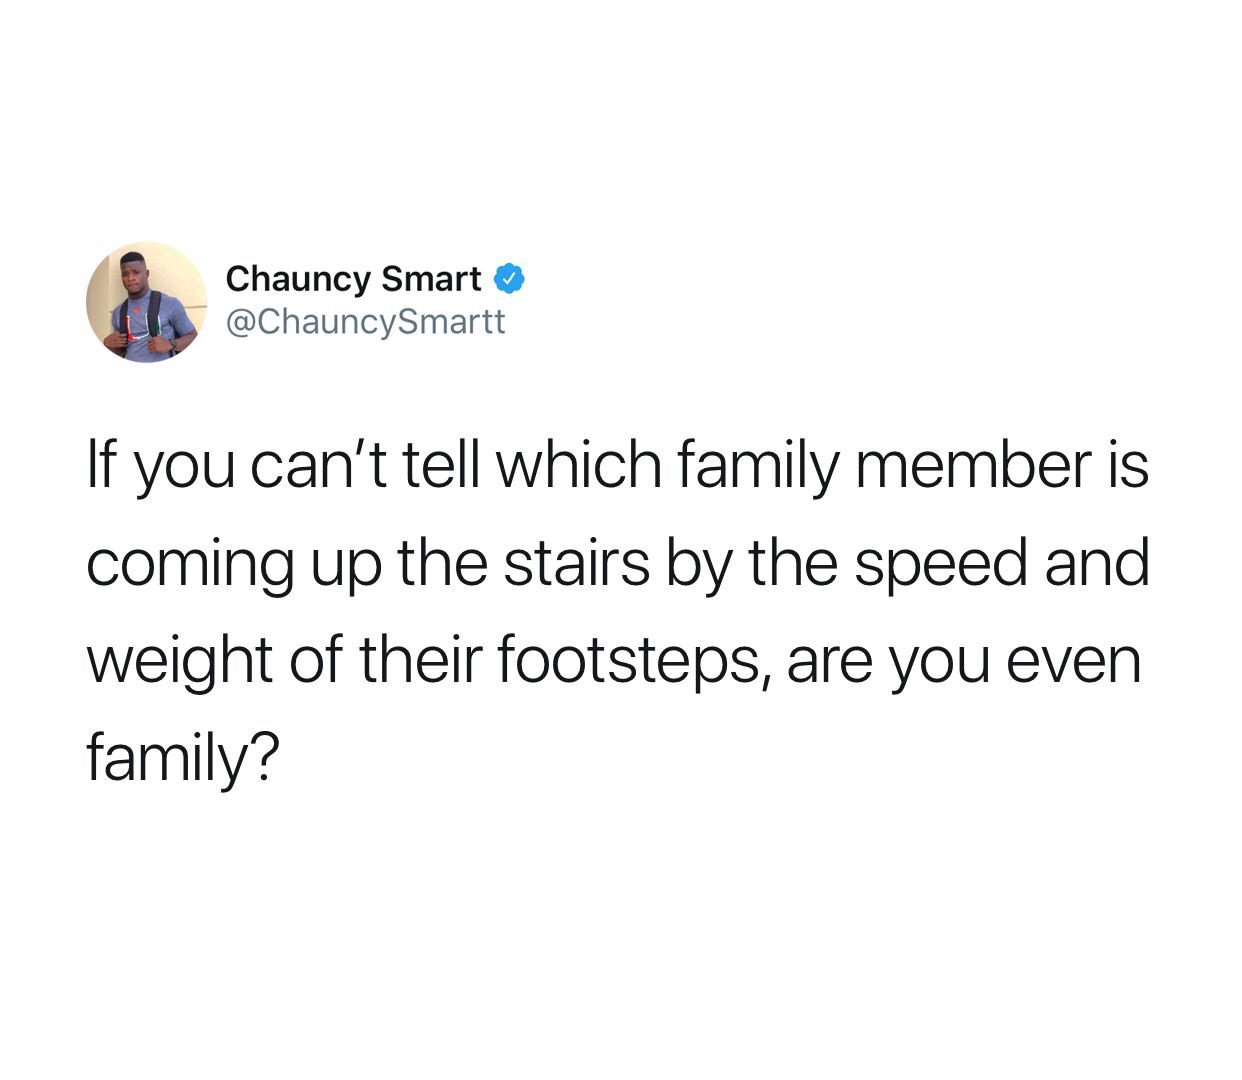 point - Chauncy Smart If you can't tell which family member is coming up the stairs by the speed and weight of their footsteps, are you even family?